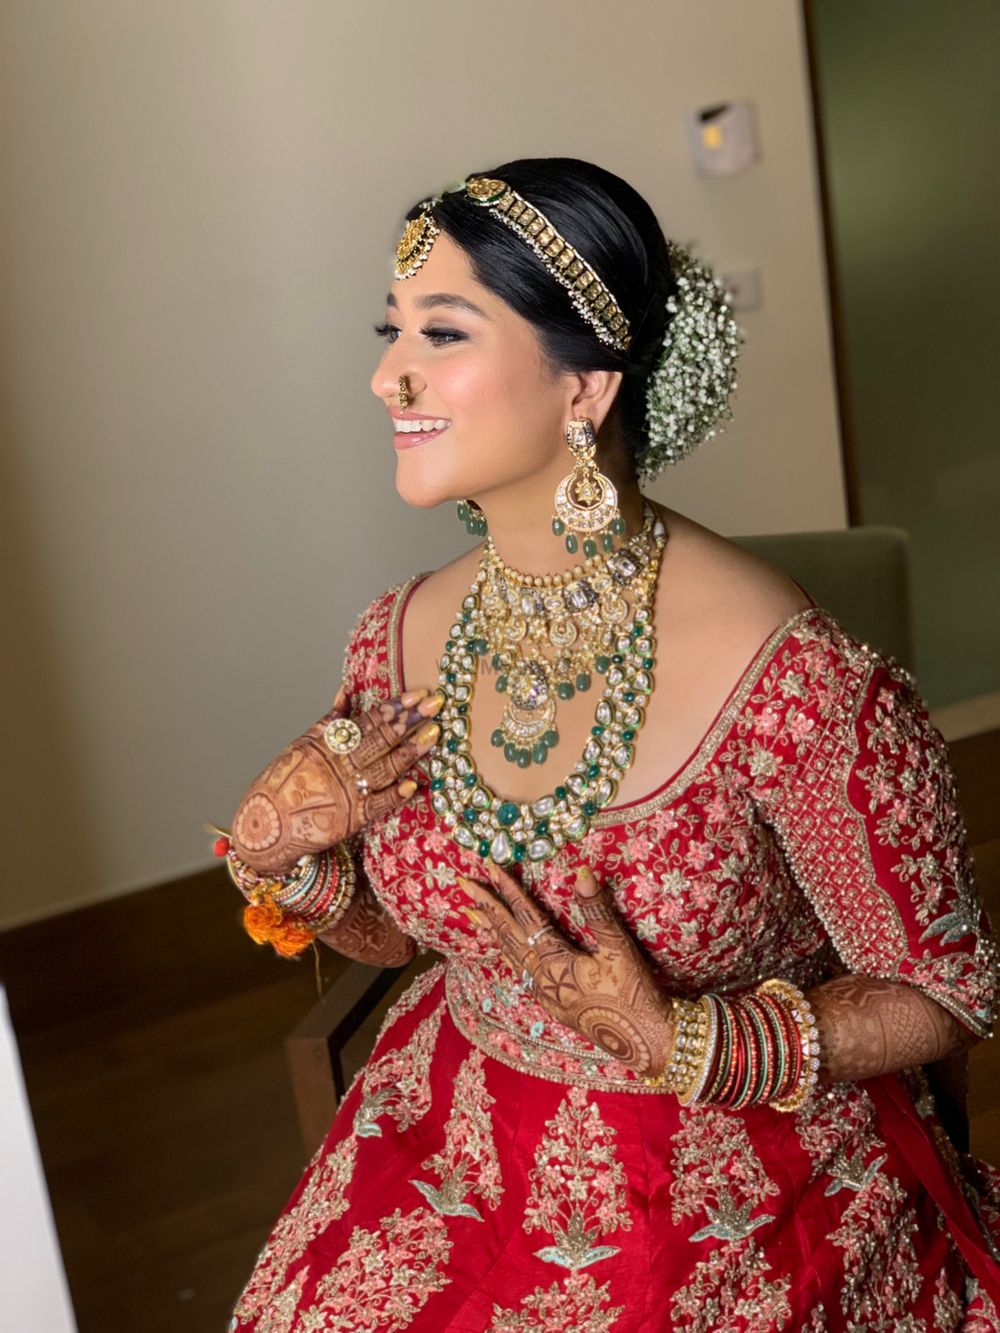 Photo From Brides - By Faces By Chaitali Sengupta